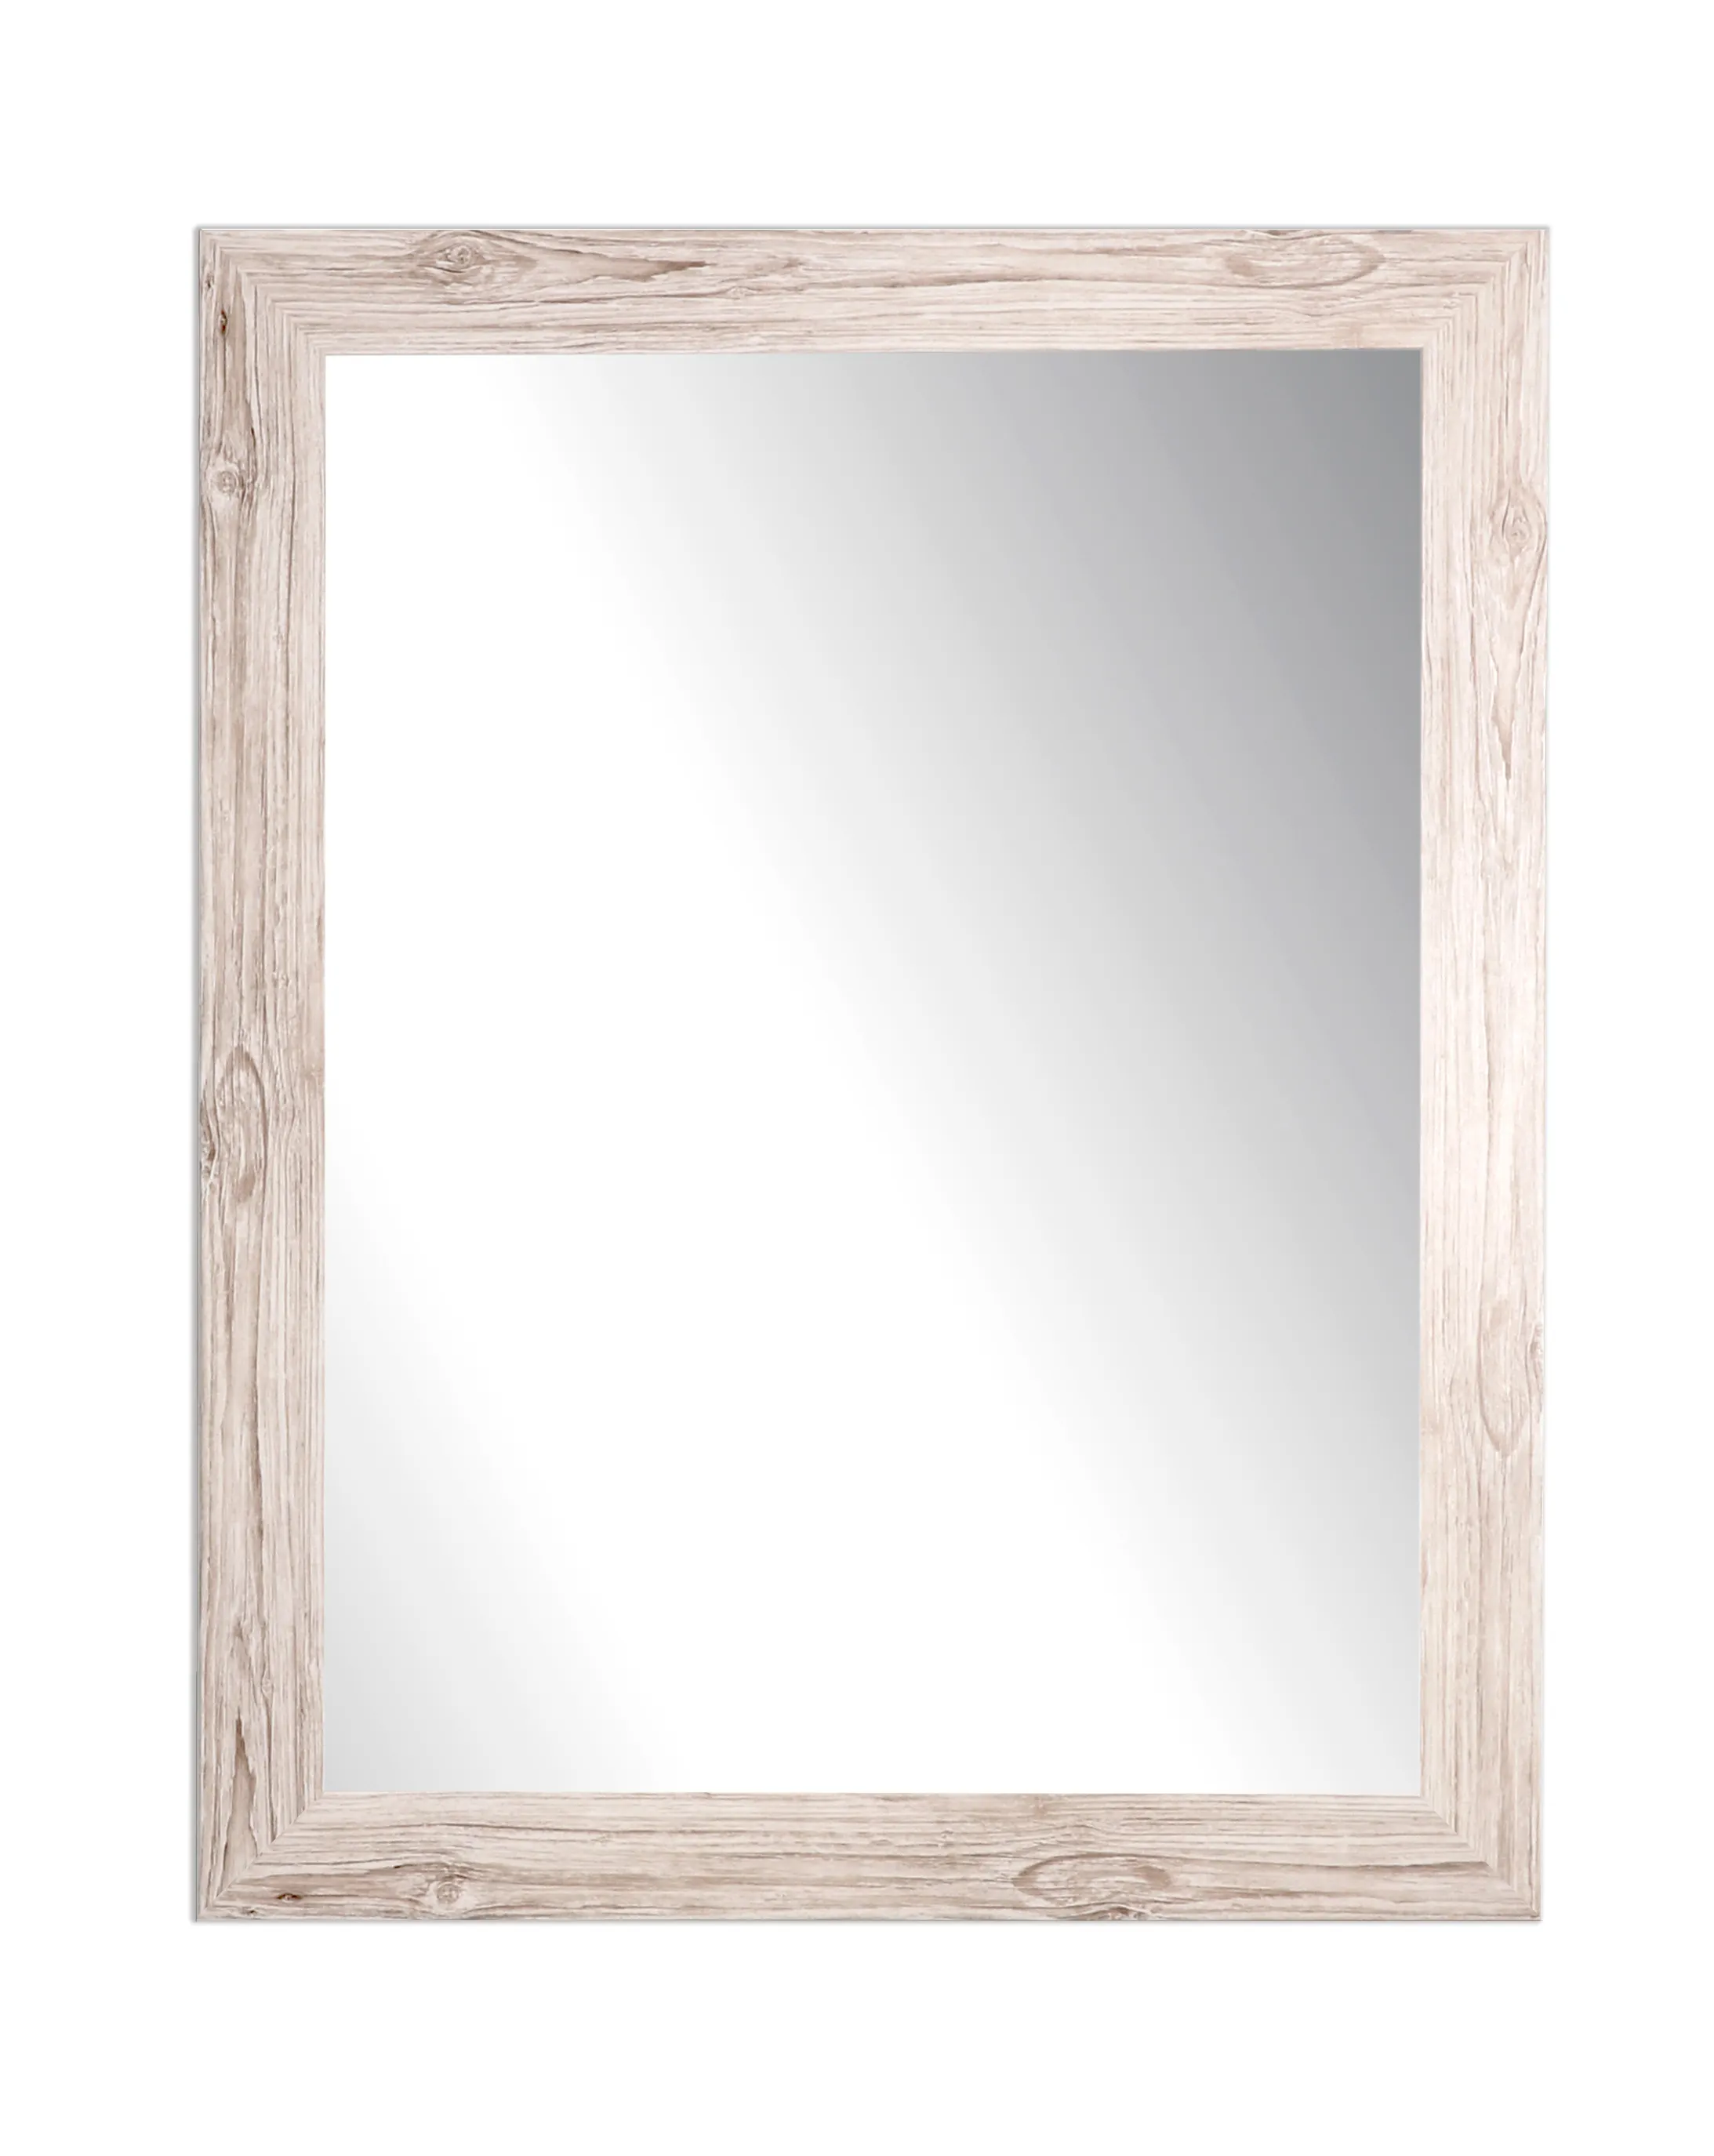 Good Quality Espresso Wall Mirror With Frame For Home Decoration Available at Wholesale Price From Exporter